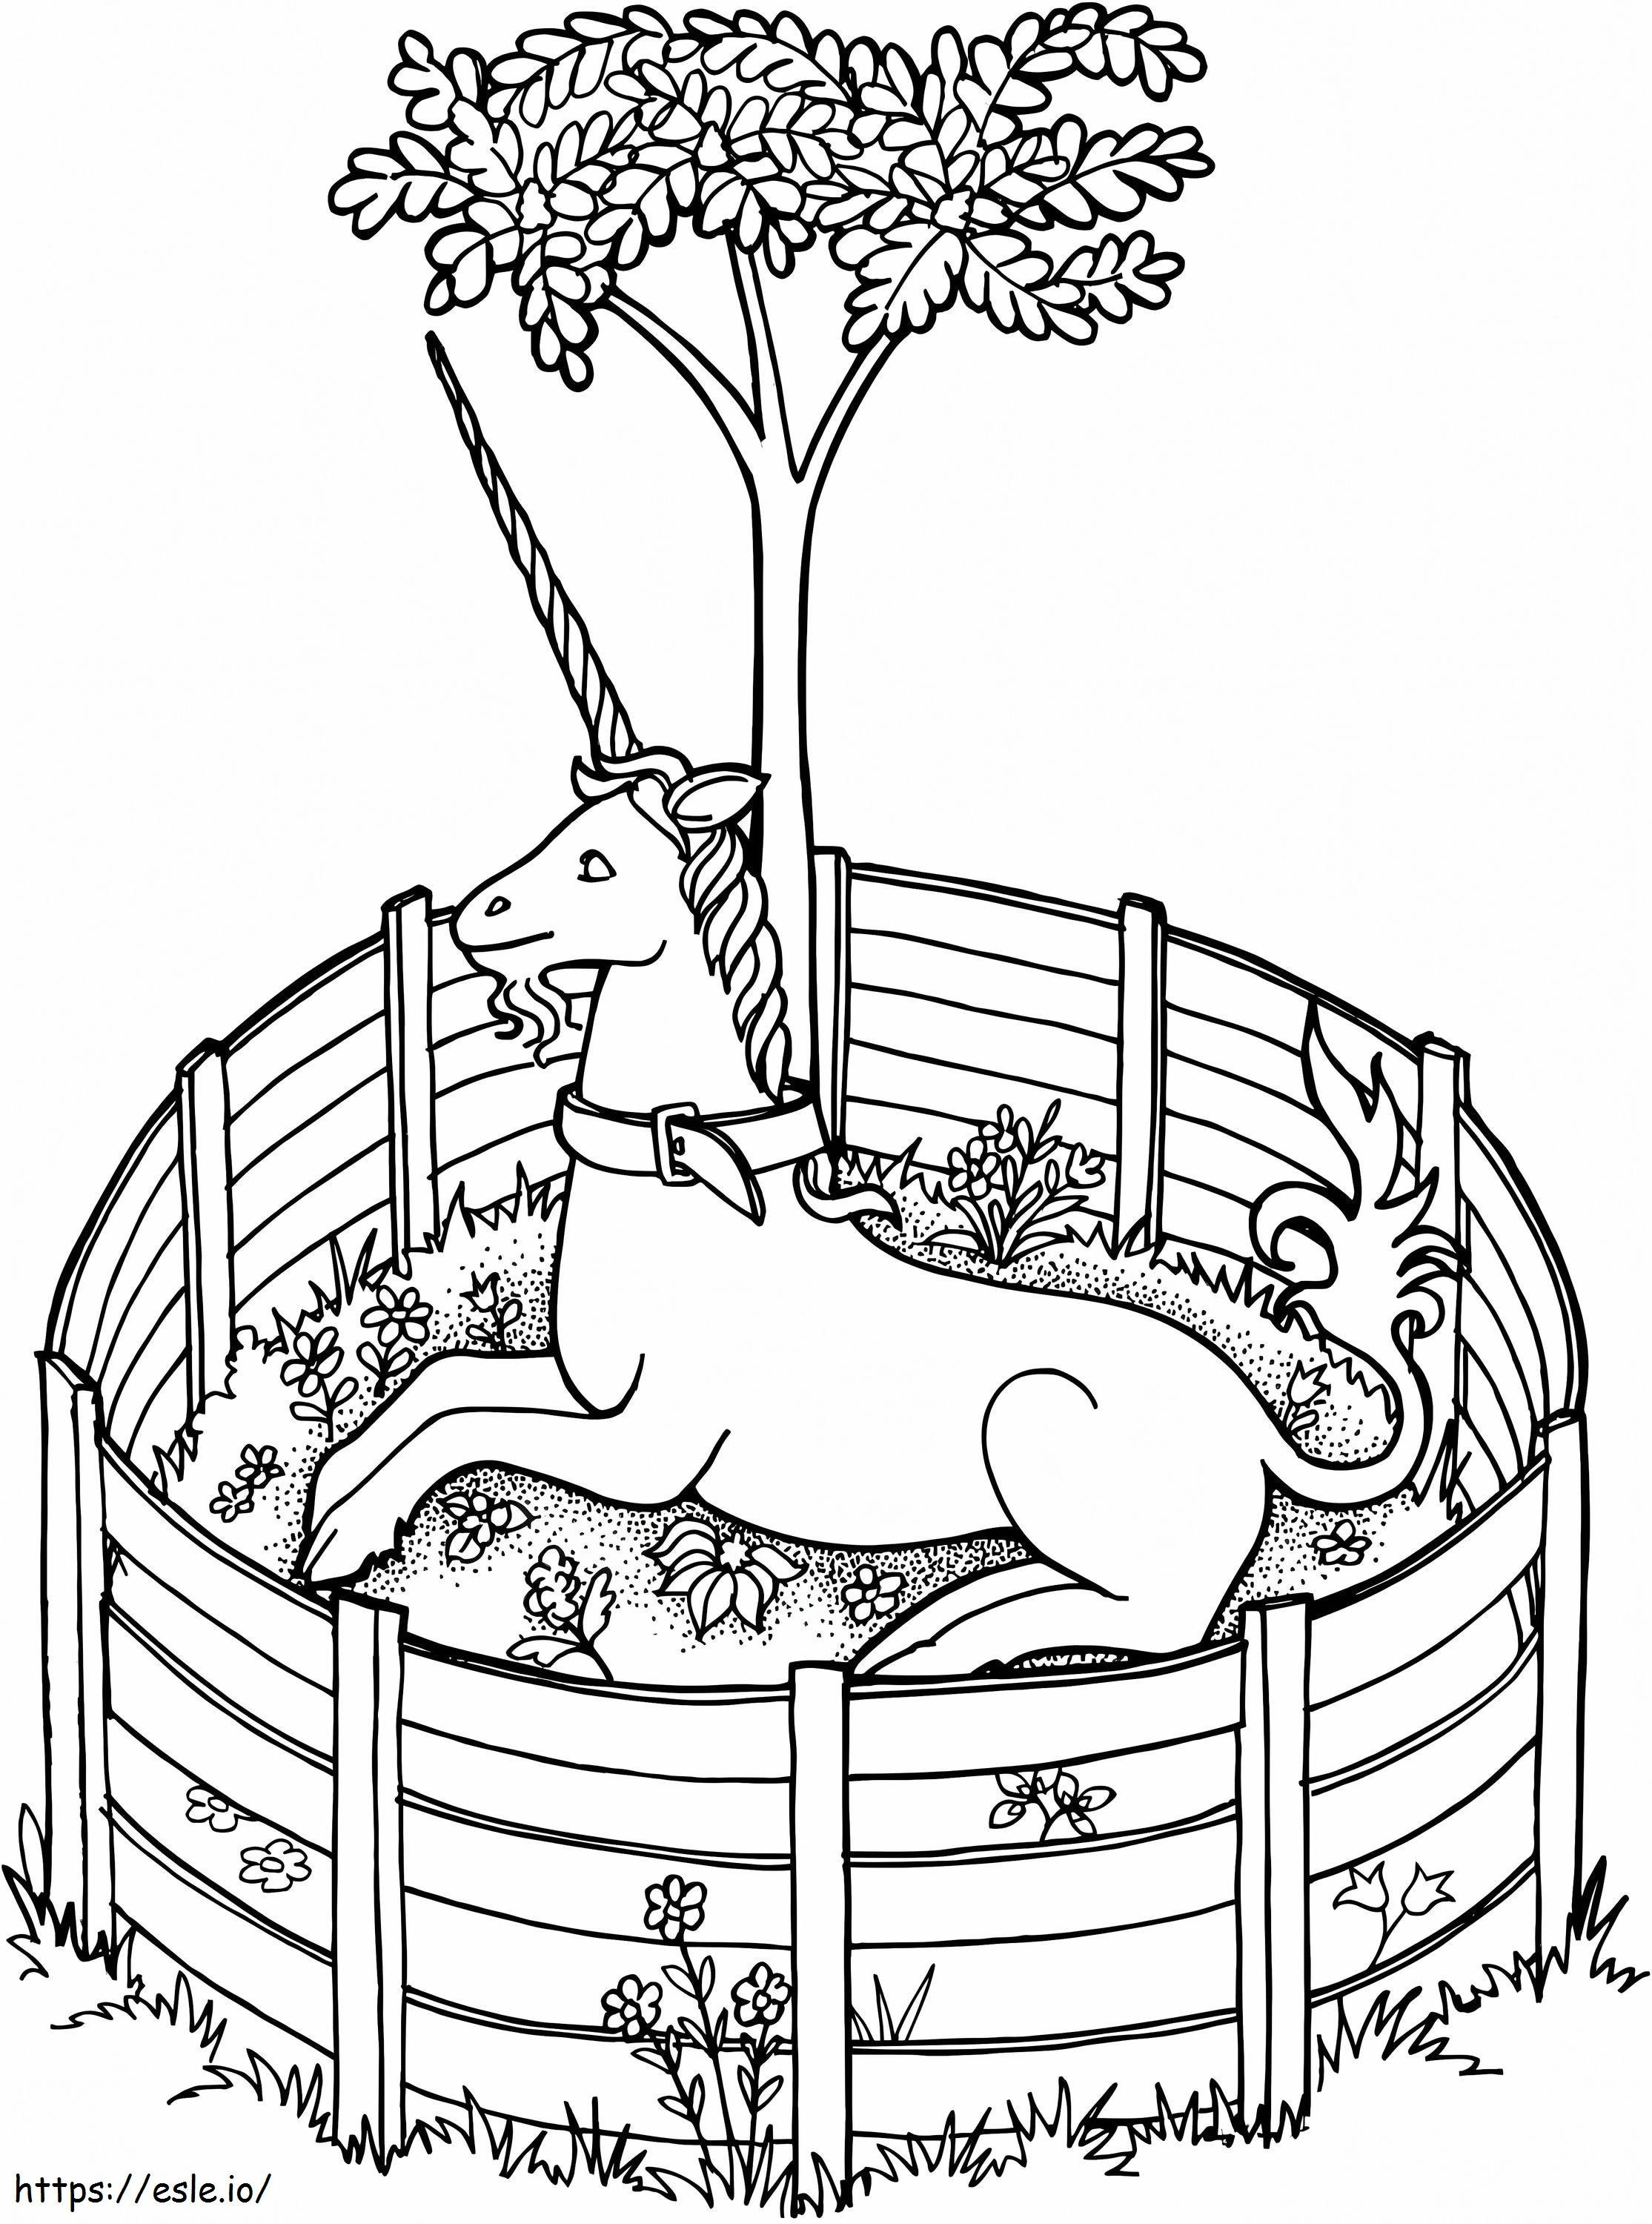 1563757418 Unicorn In Cage A4 coloring page